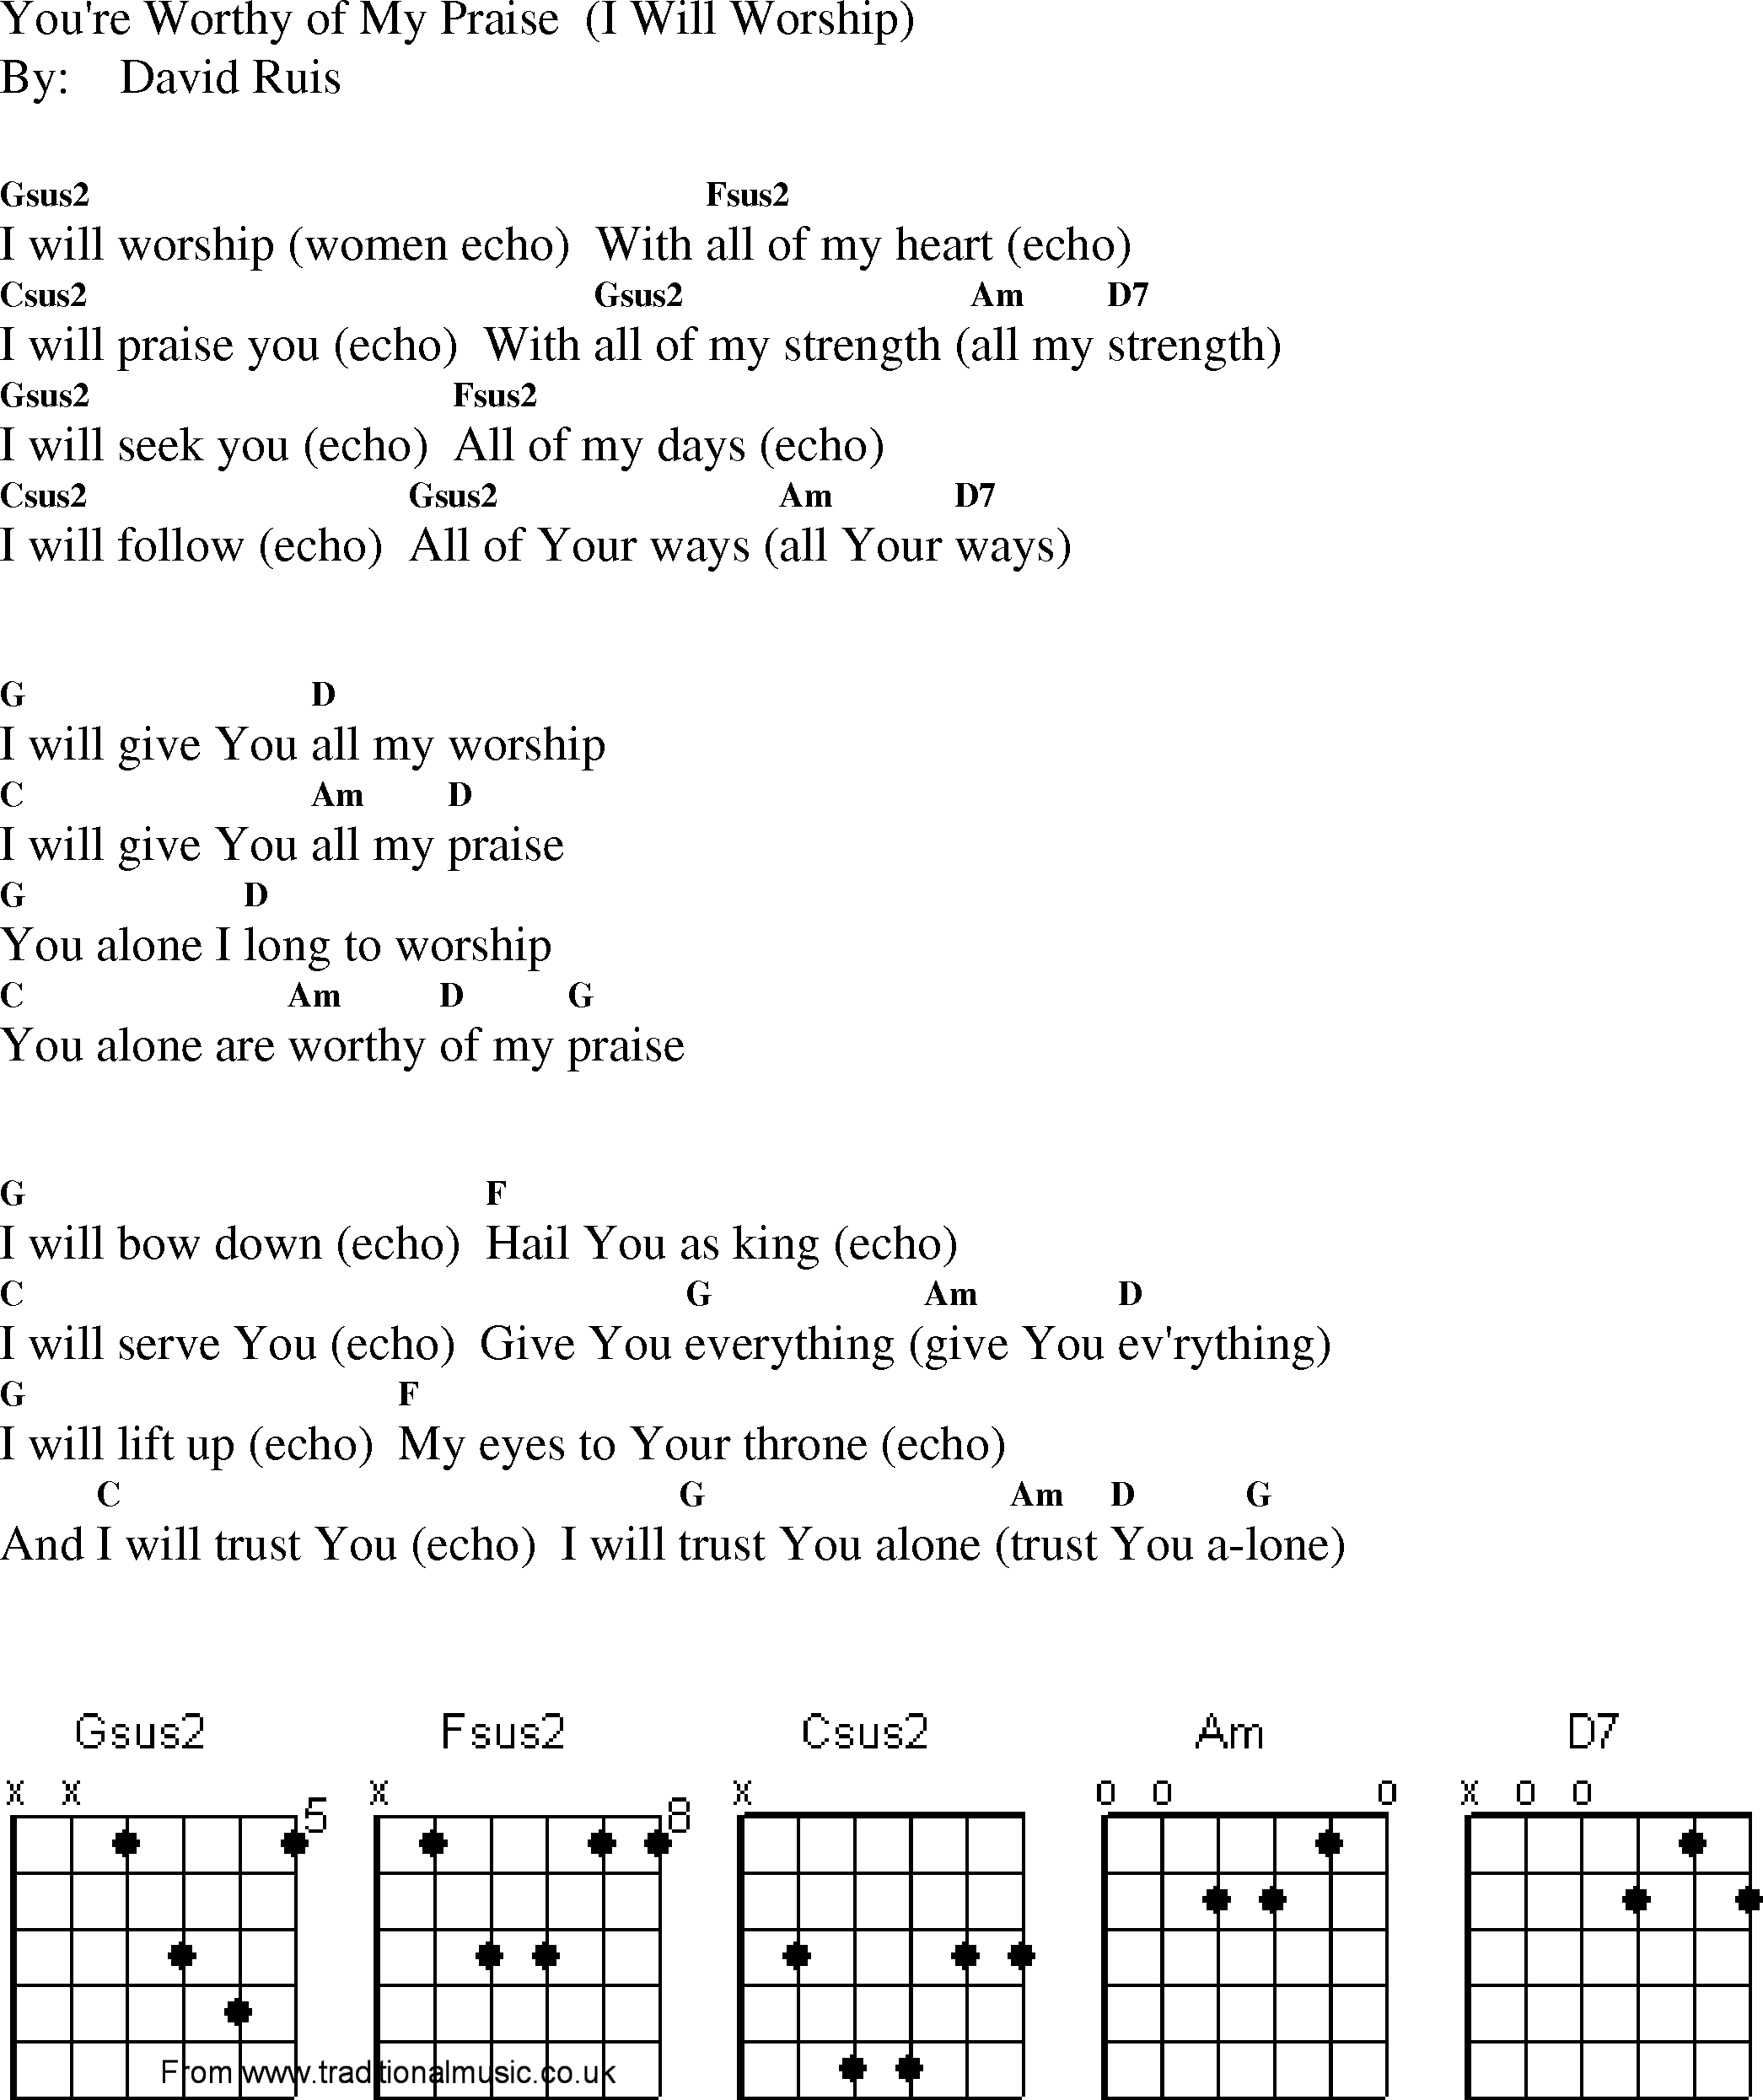 Gospel Song: youre_worthy_of_my_praise_i_will_worship, lyrics and chords.